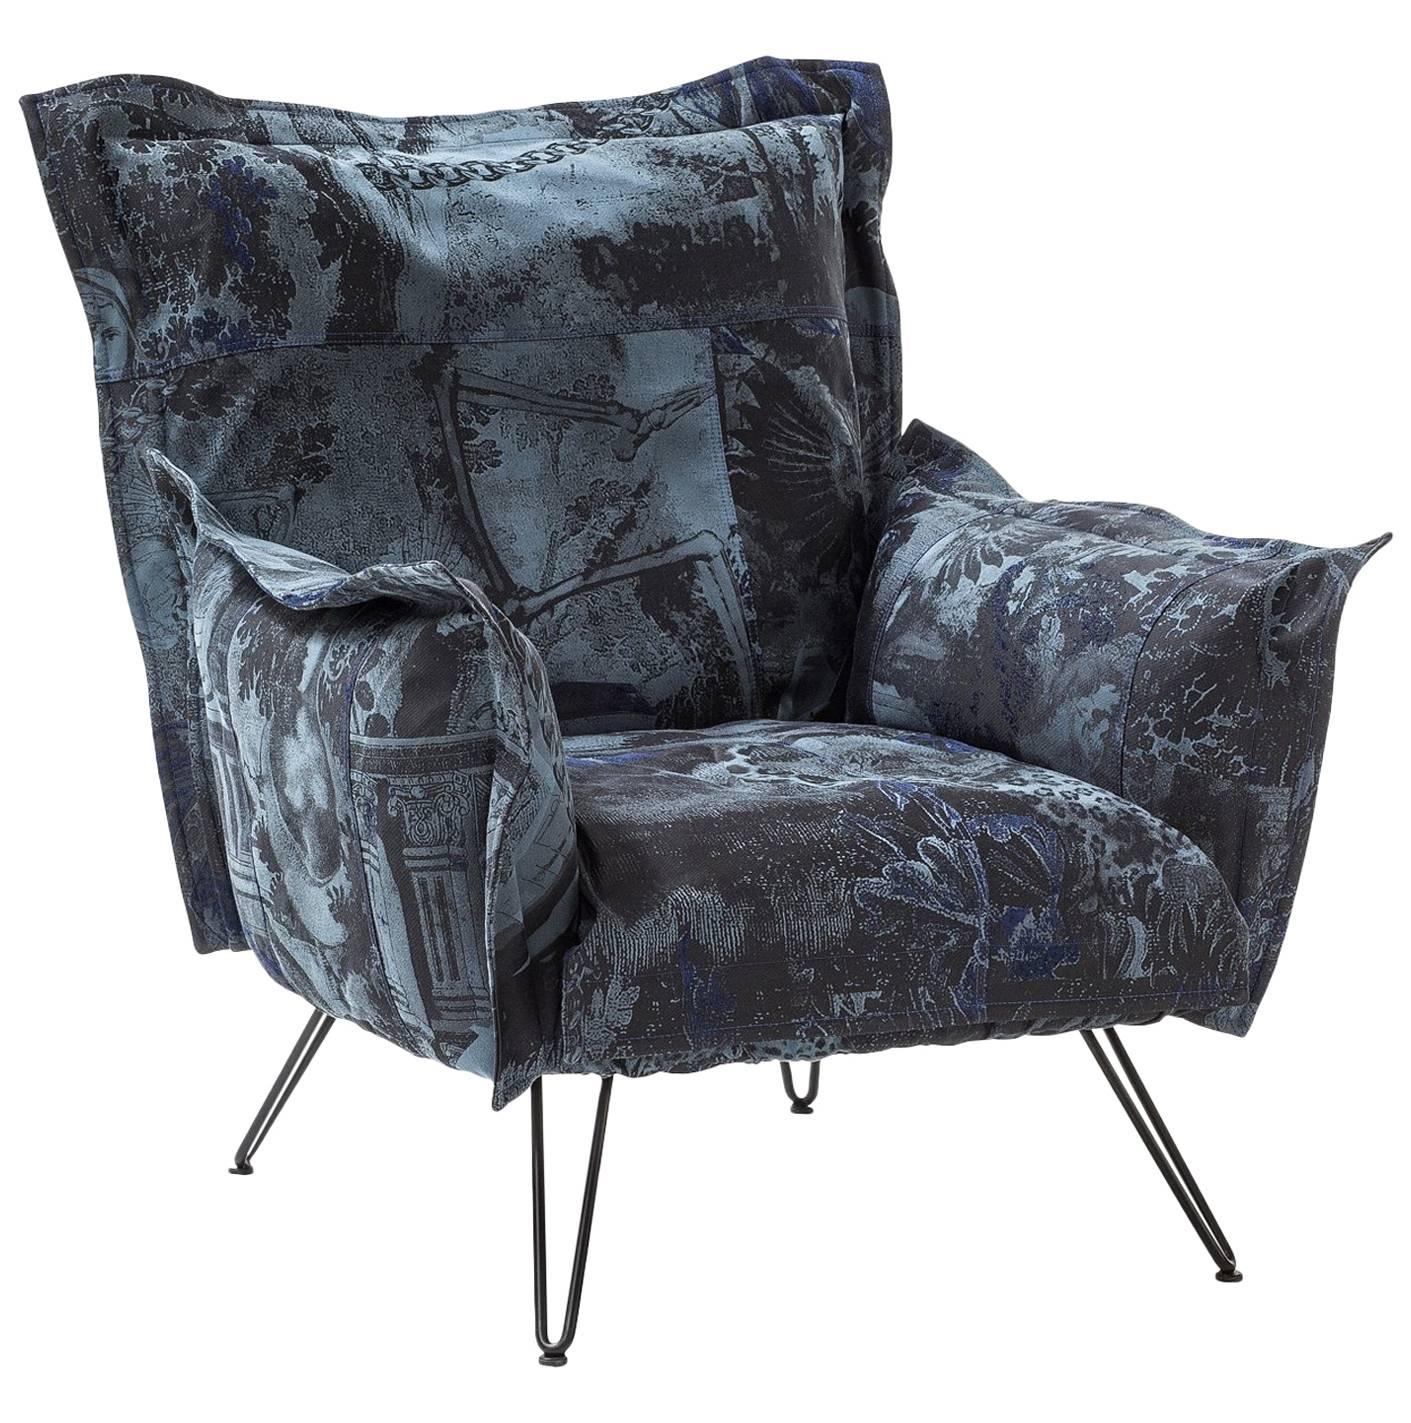 "Cloudscape" Armchair with Fiber or Goose and Steel Frame by Moroso for Diesel For Sale